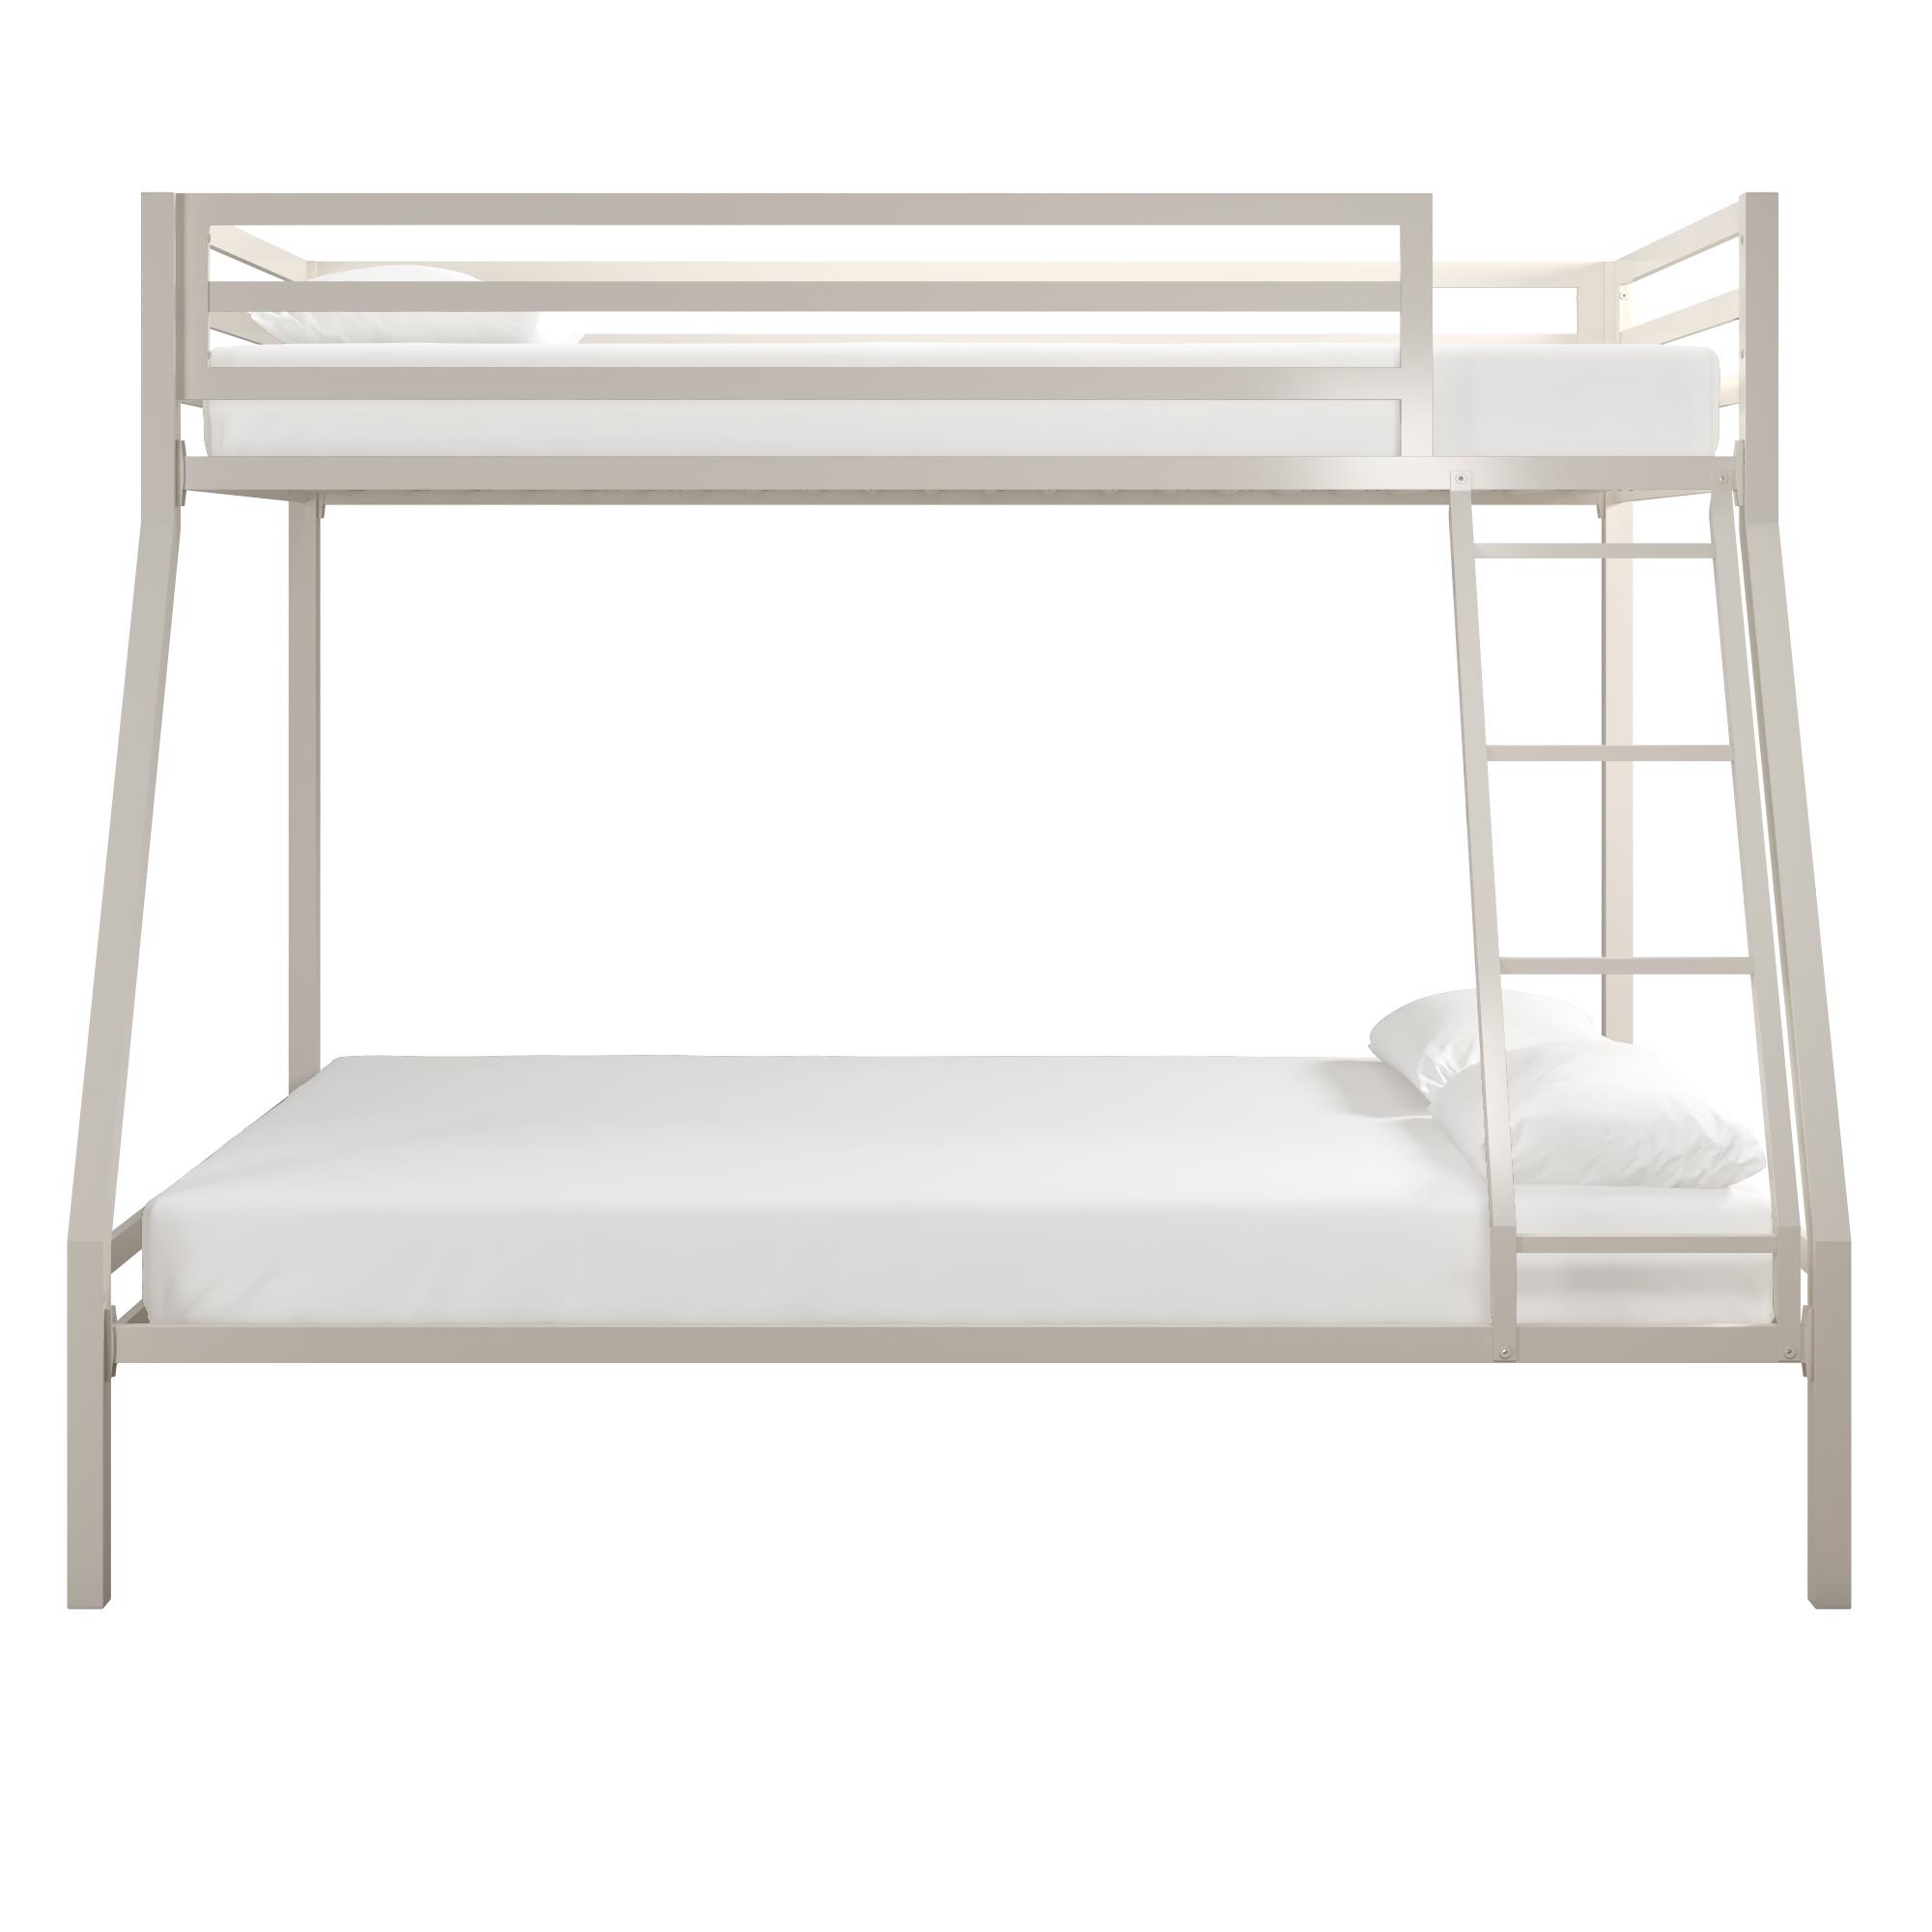 Mainstays Premium Twin over Full Metal Bunk Bed, Off White - image 9 of 13